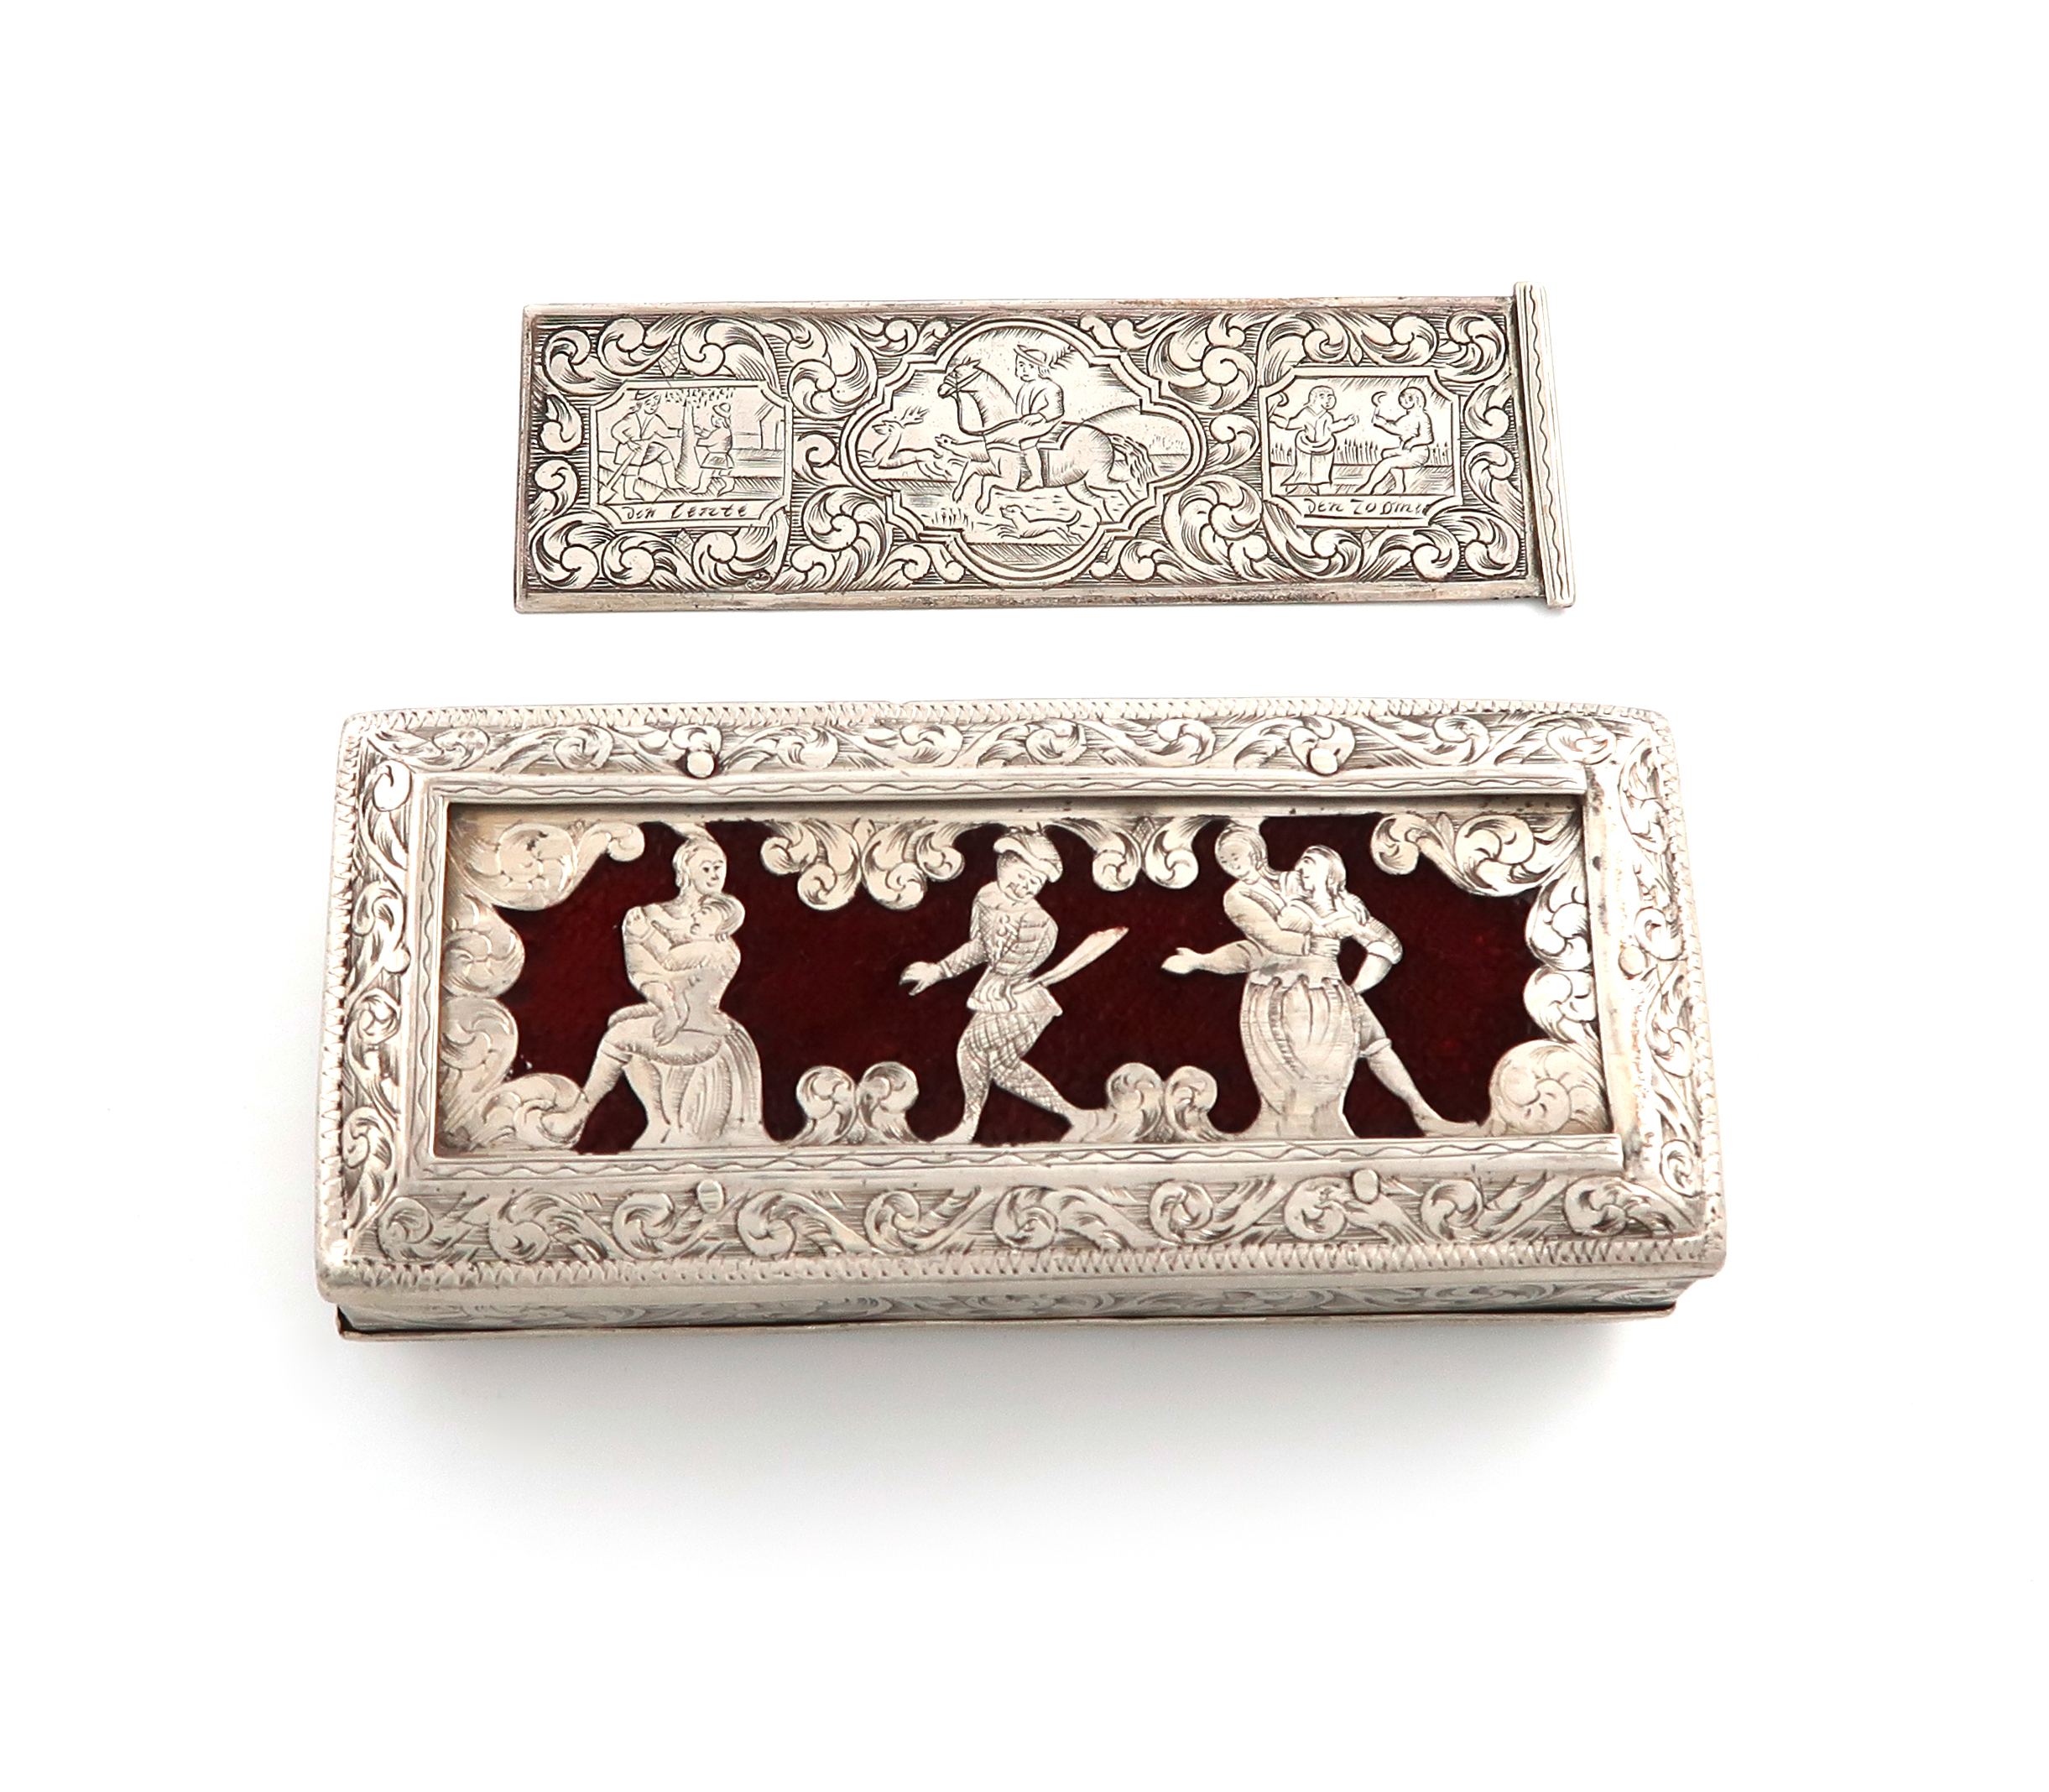 A 19th century Dutch silver tobacco box, by Rinze Jans Spaanstra, in the early 17th century - Image 4 of 6